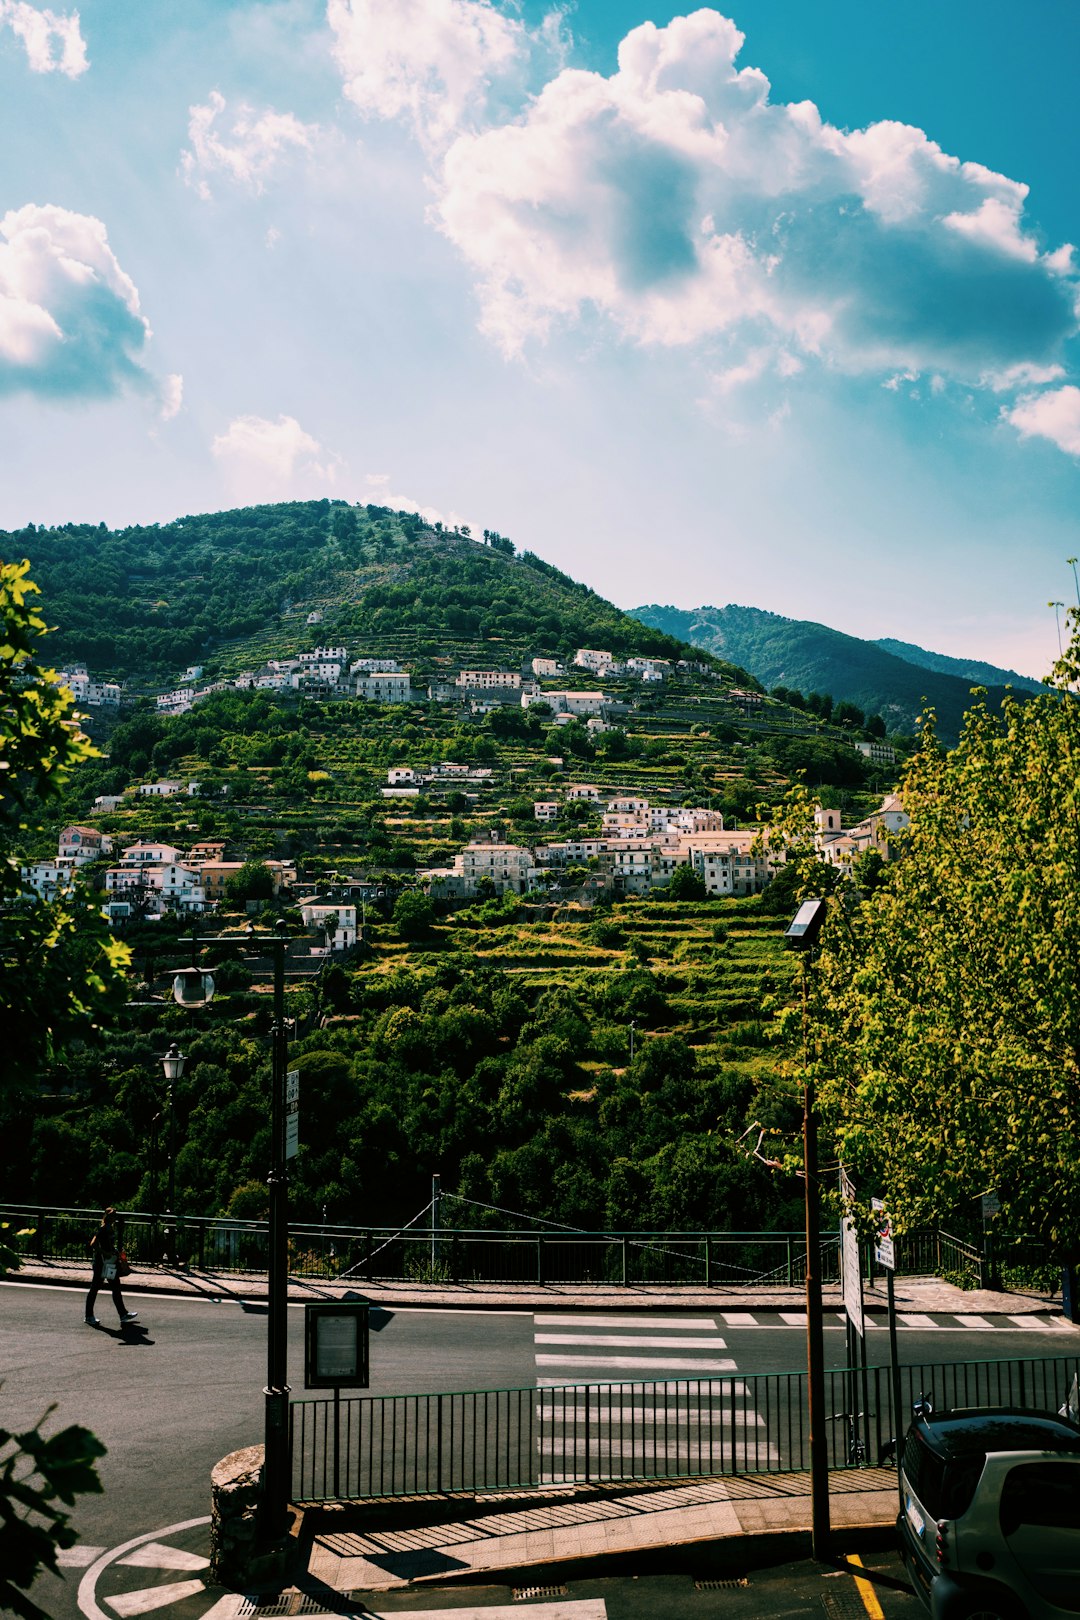 Travel Tips and Stories of Ravello in Italy